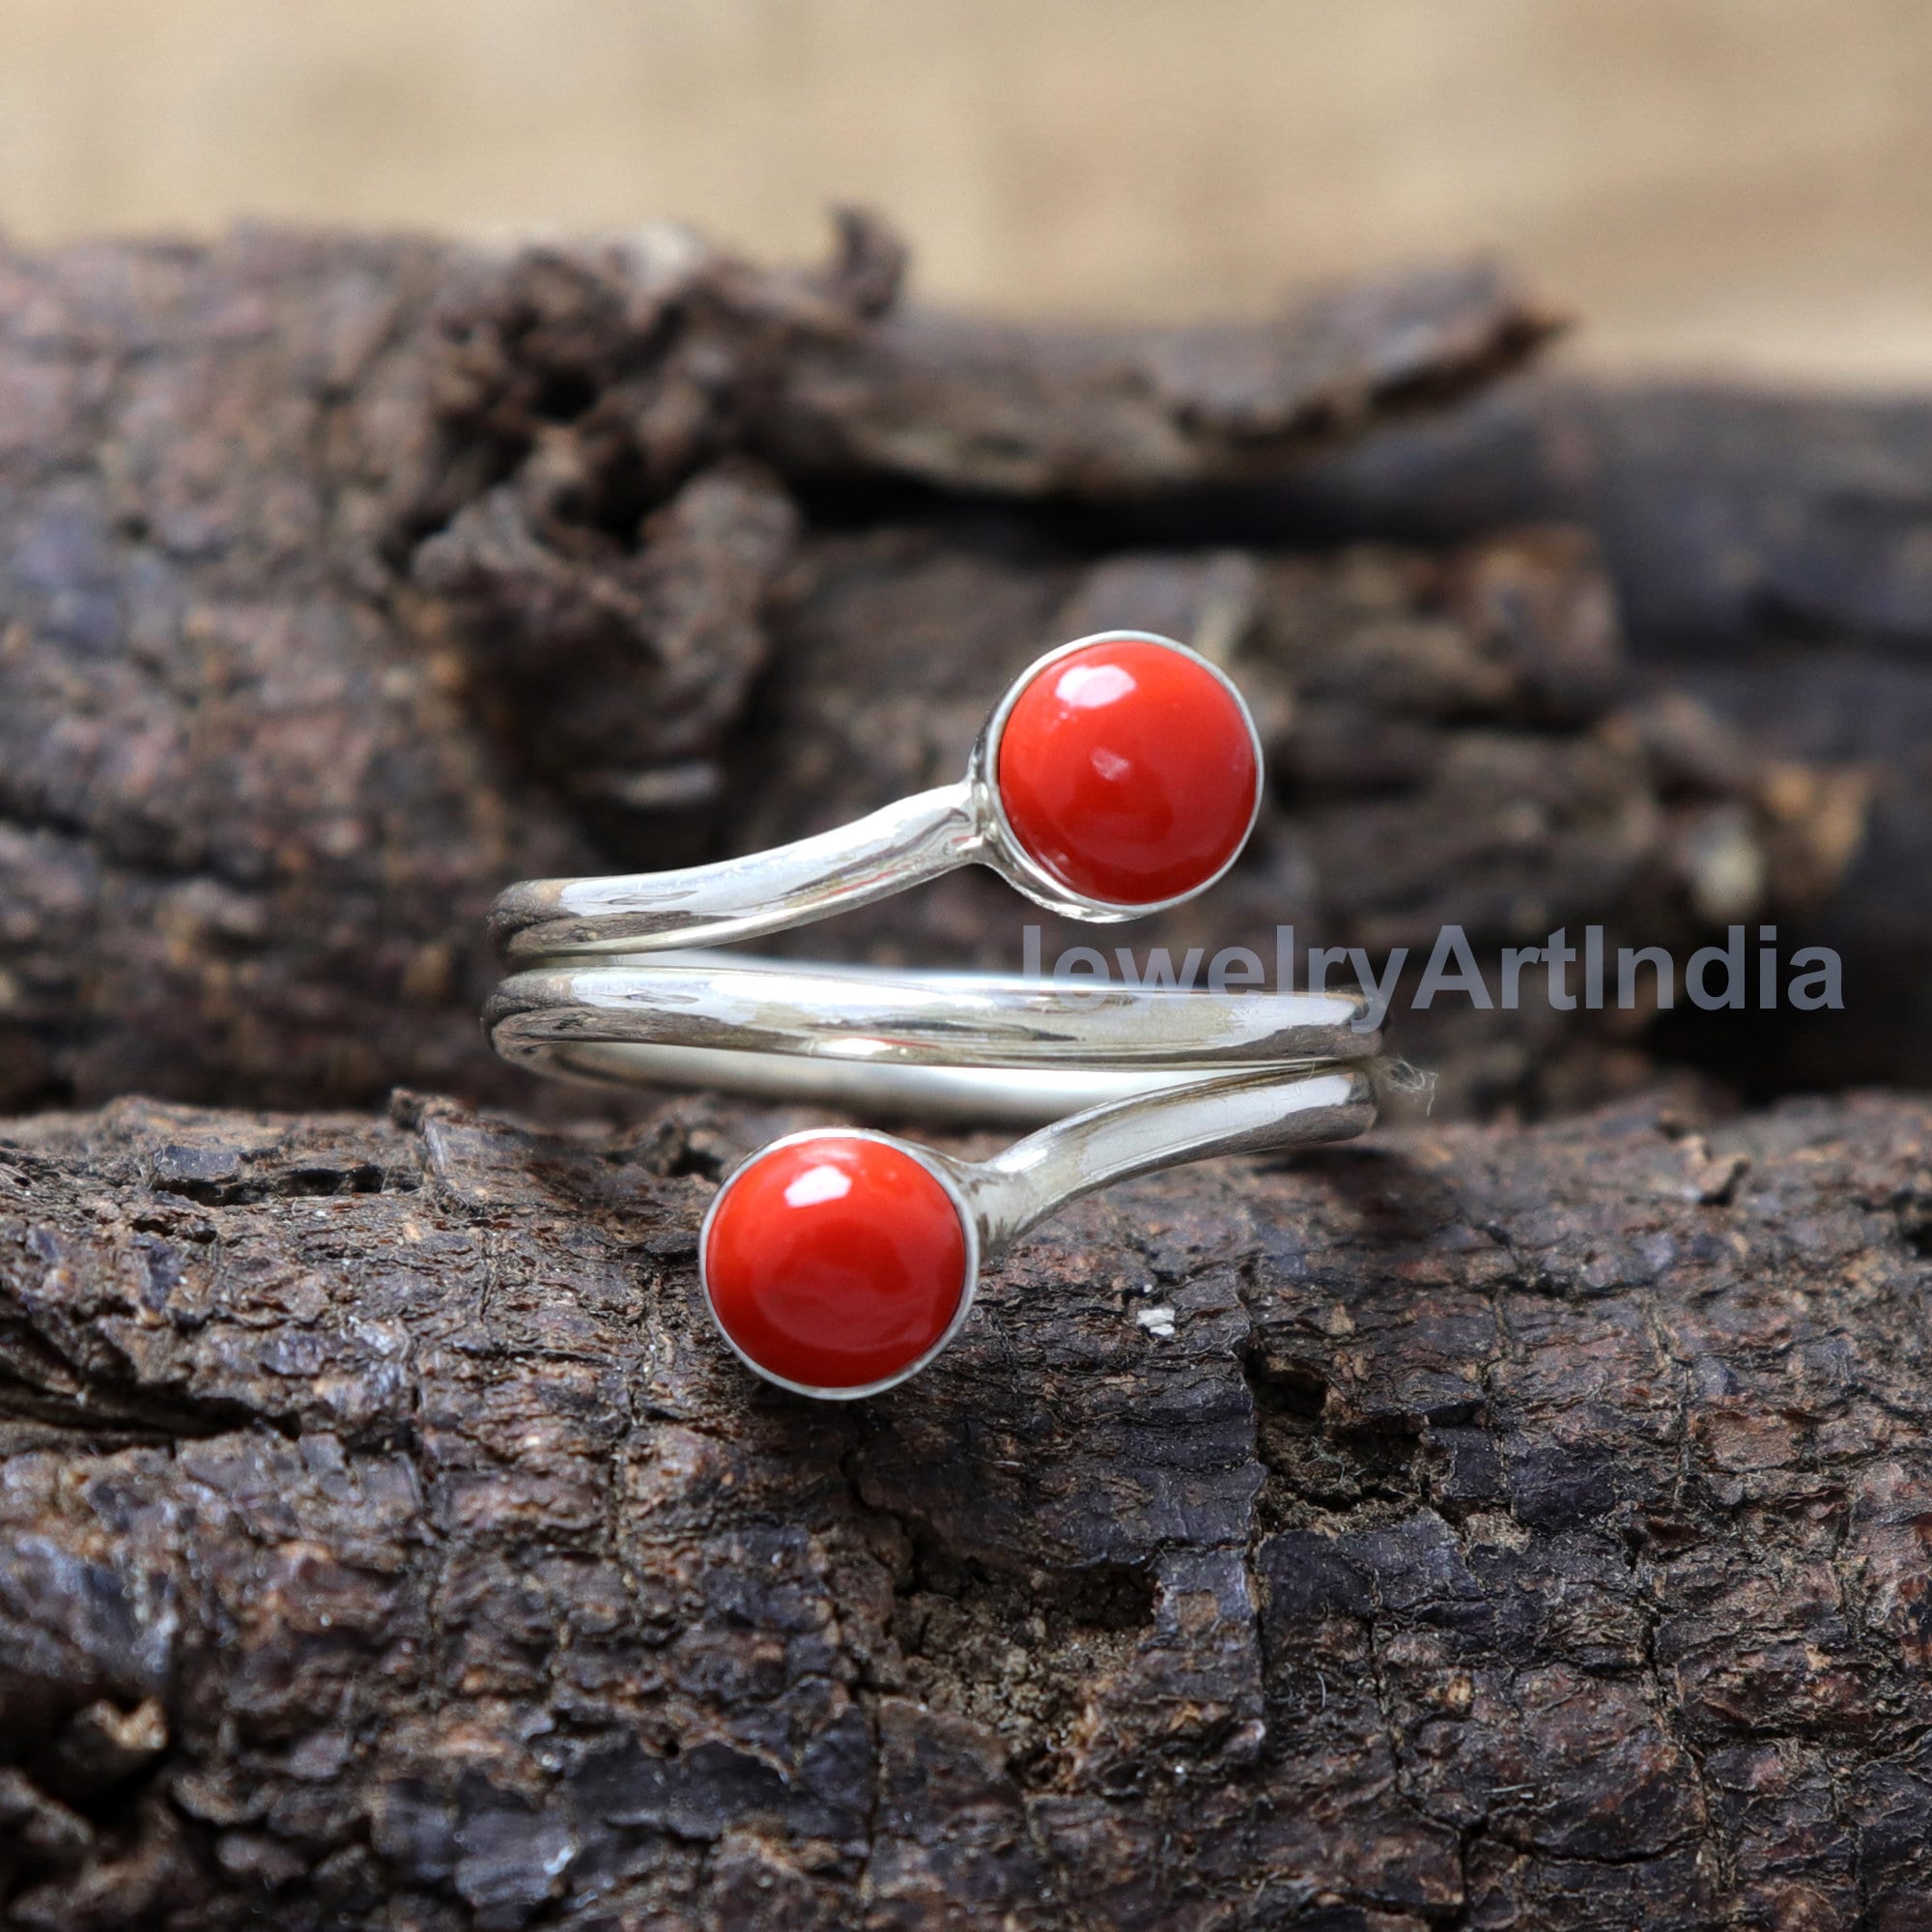 Red Coral Silver Ring 925 Solid Sterling Silver Handmade Jewelry Size 3-13 US 